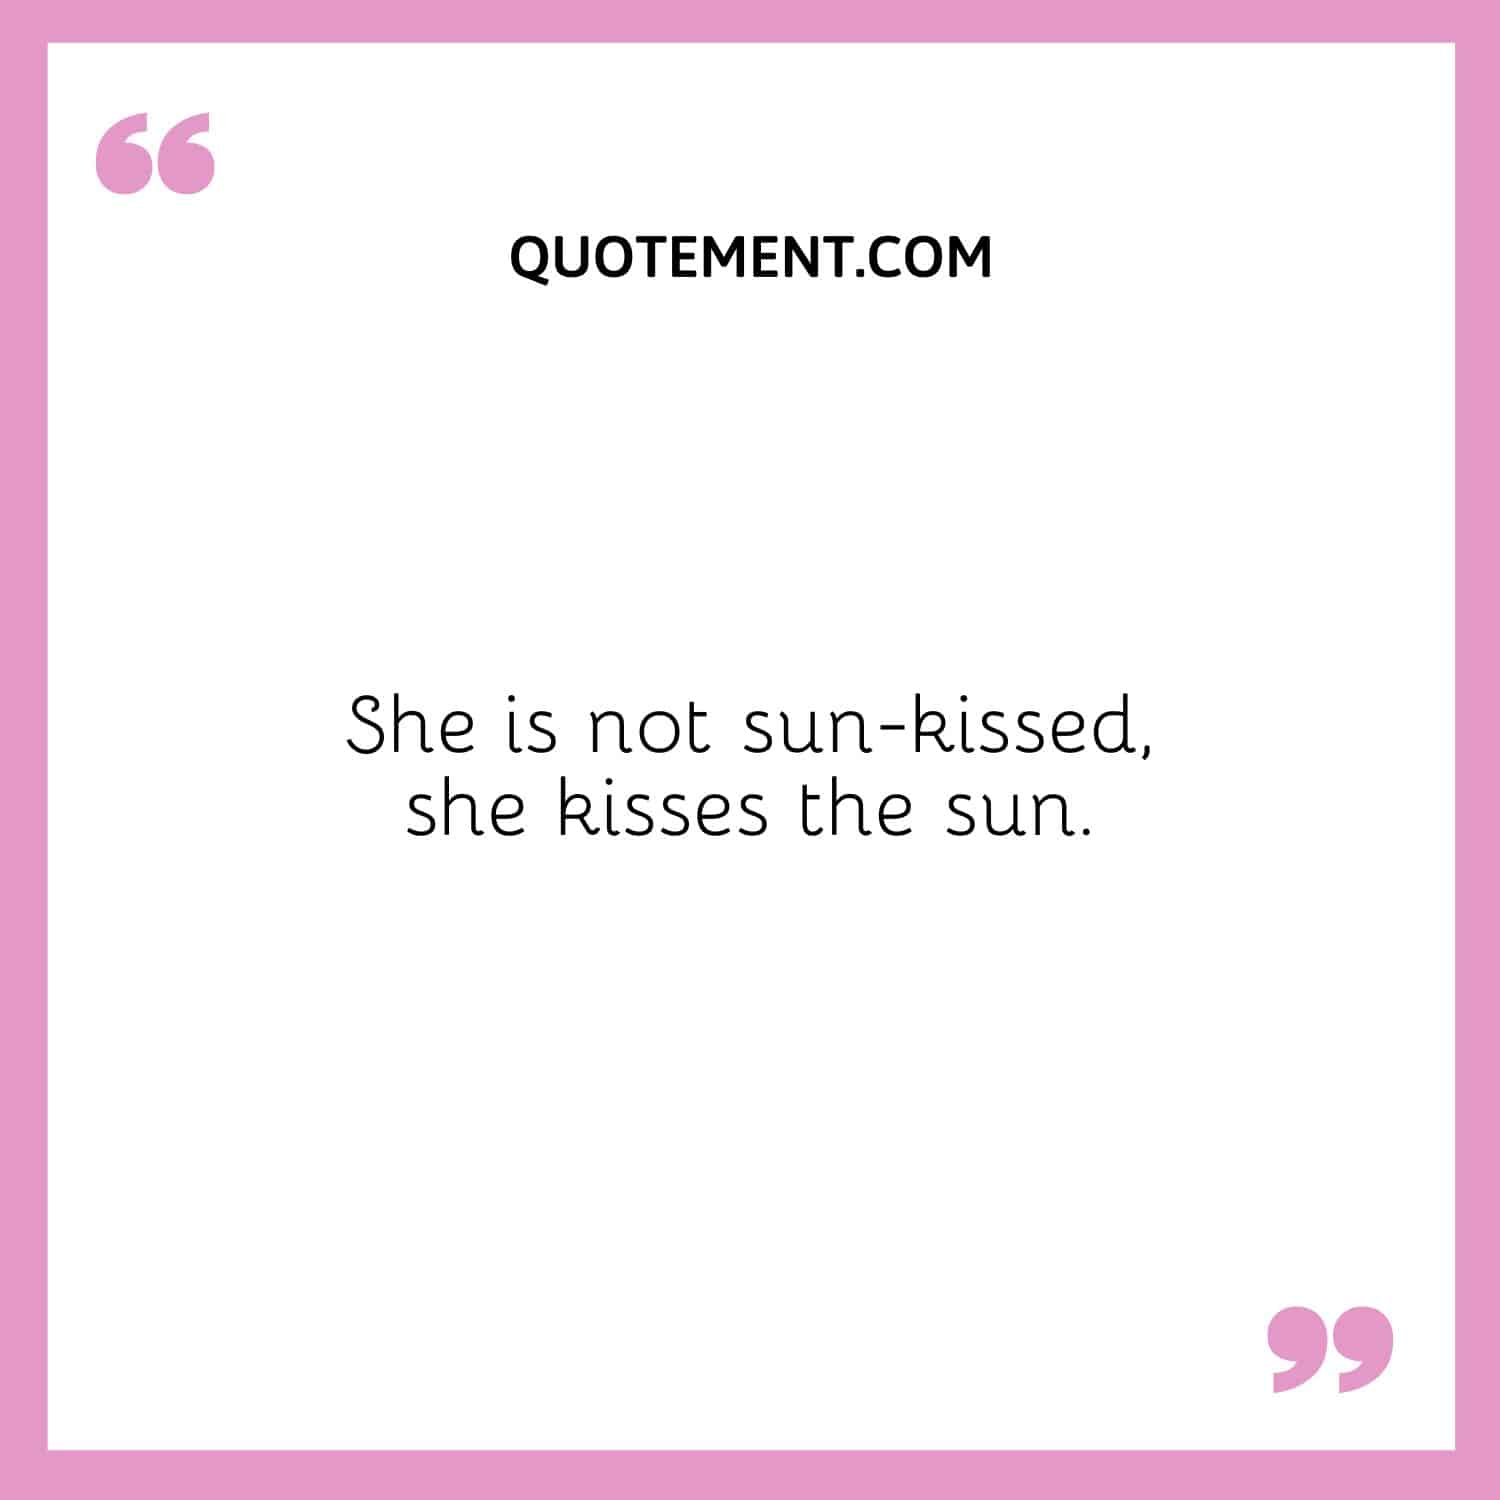 She is not sun-kissed, she kisses the sun.